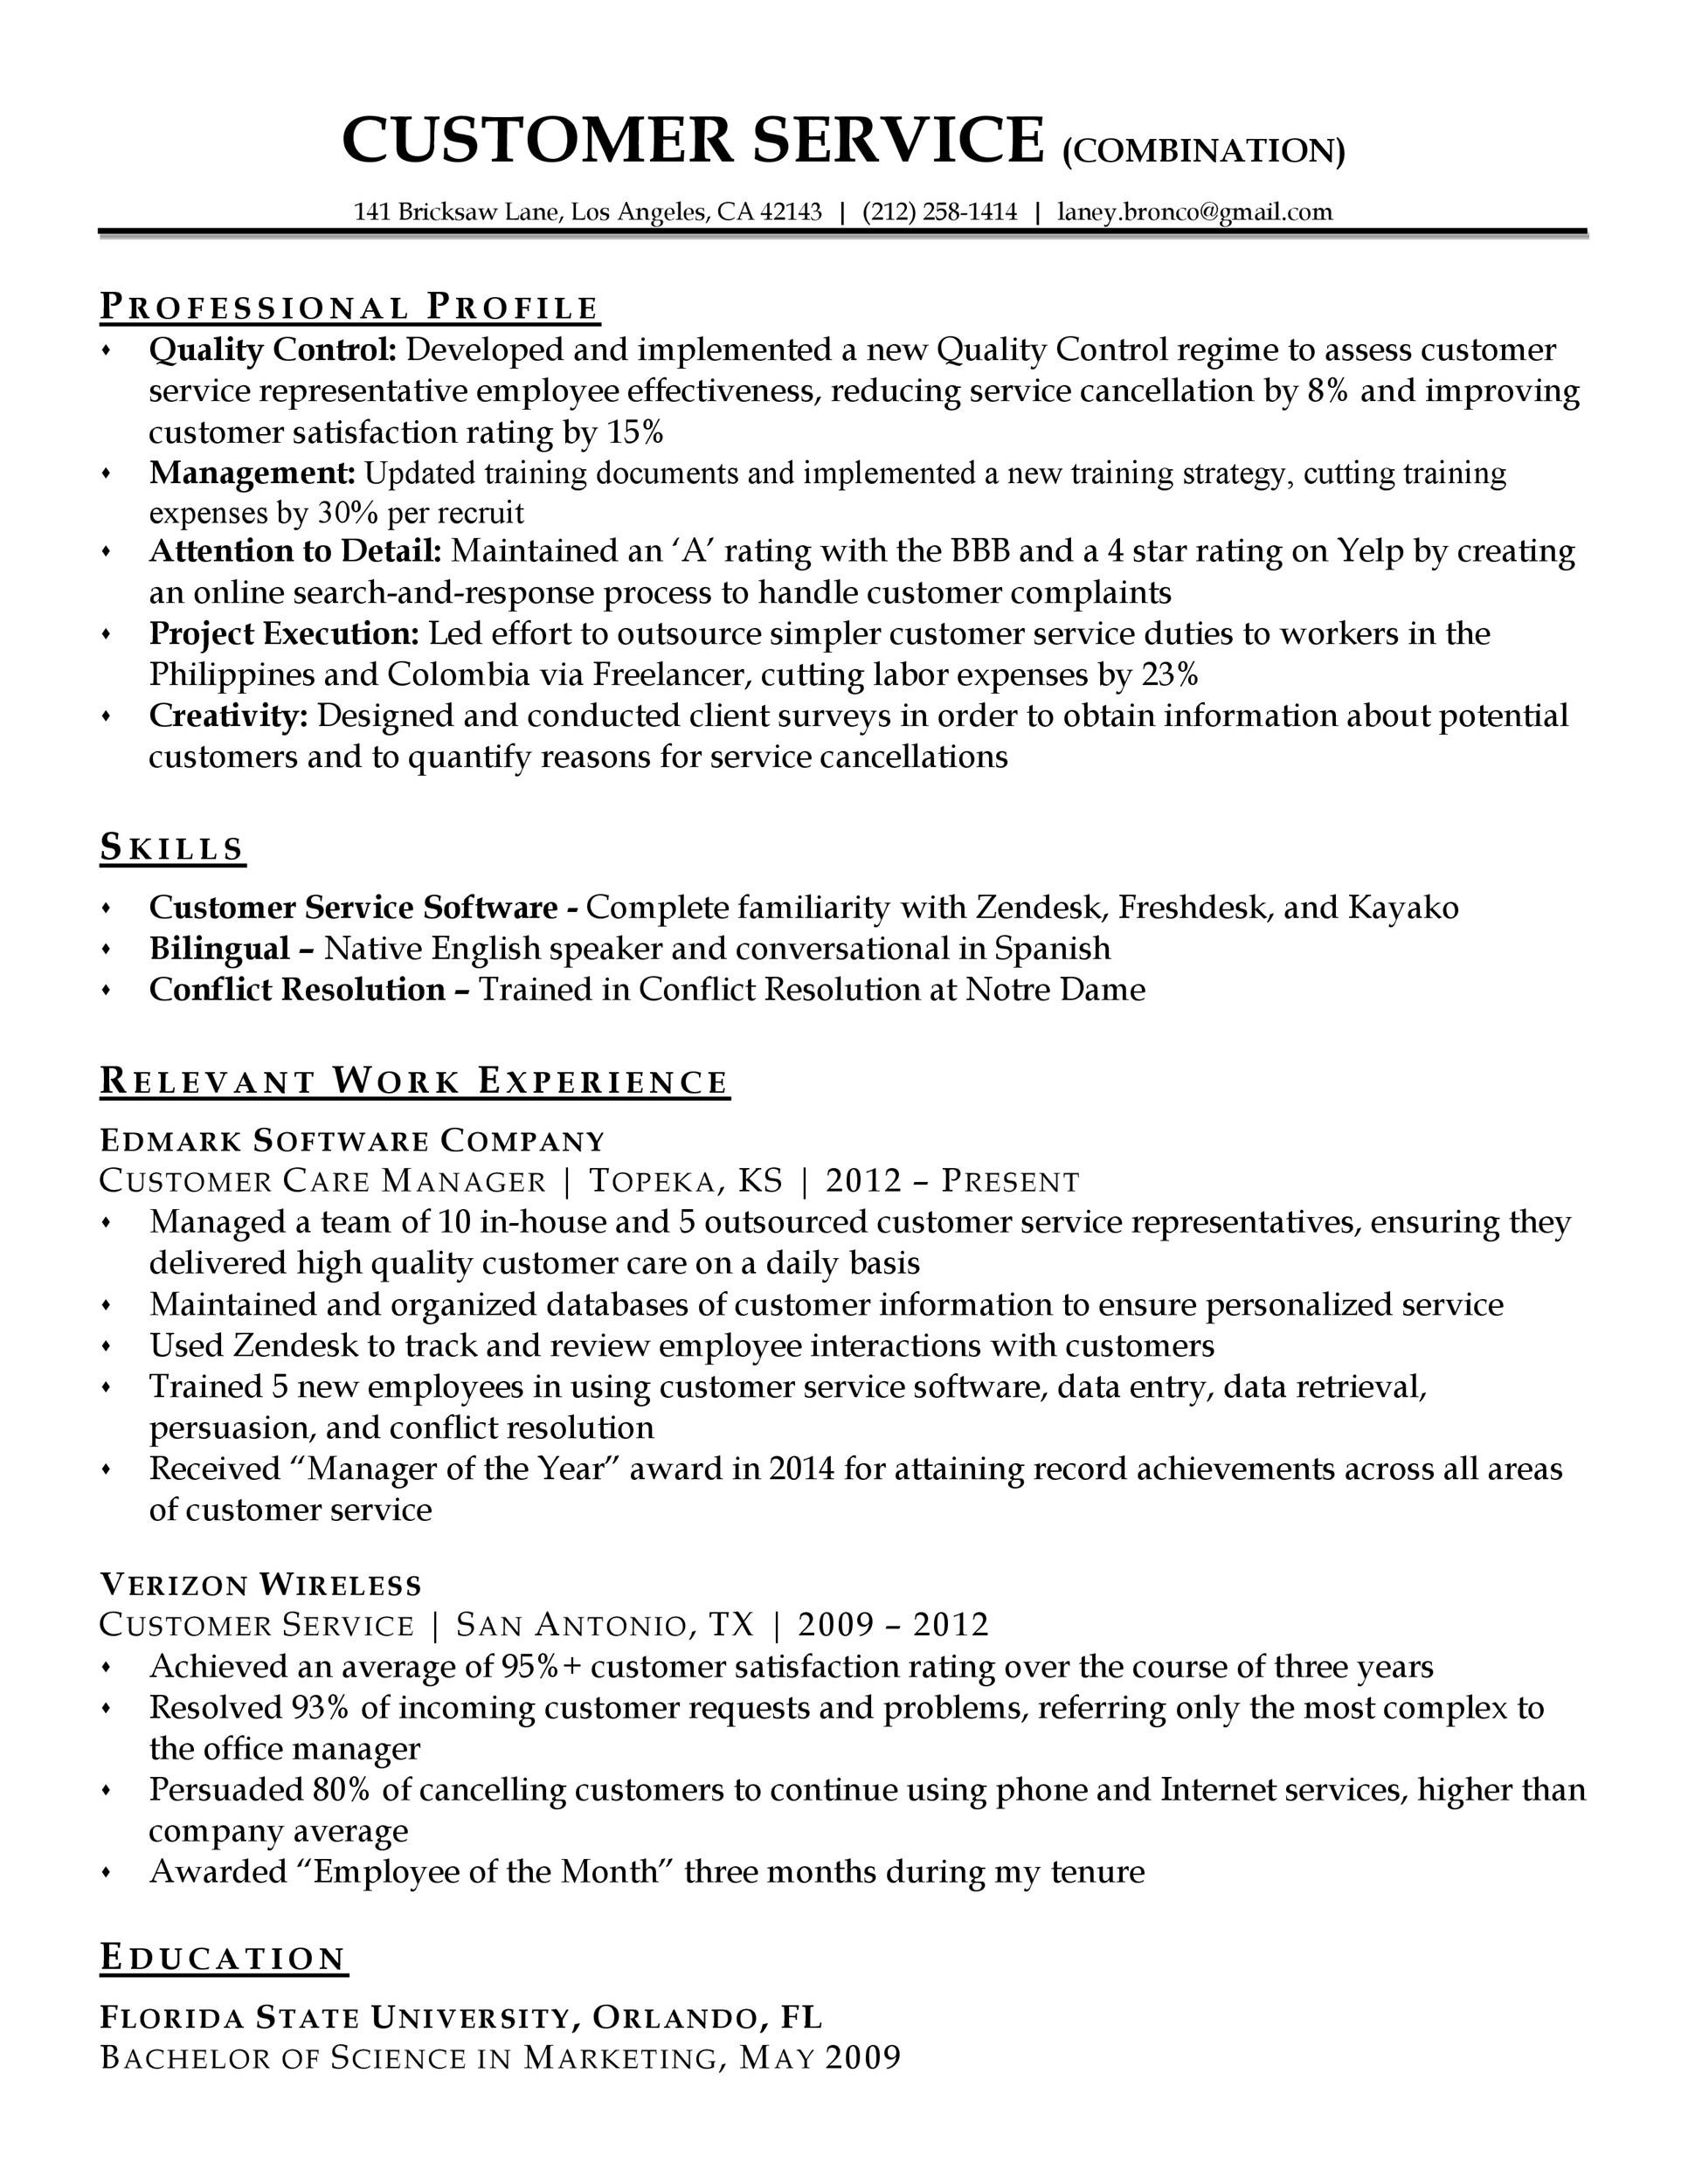 Entry Customer Service Experience Sample Resume 30lancarrezekiq Customer Service Resume Examples á Templatelab